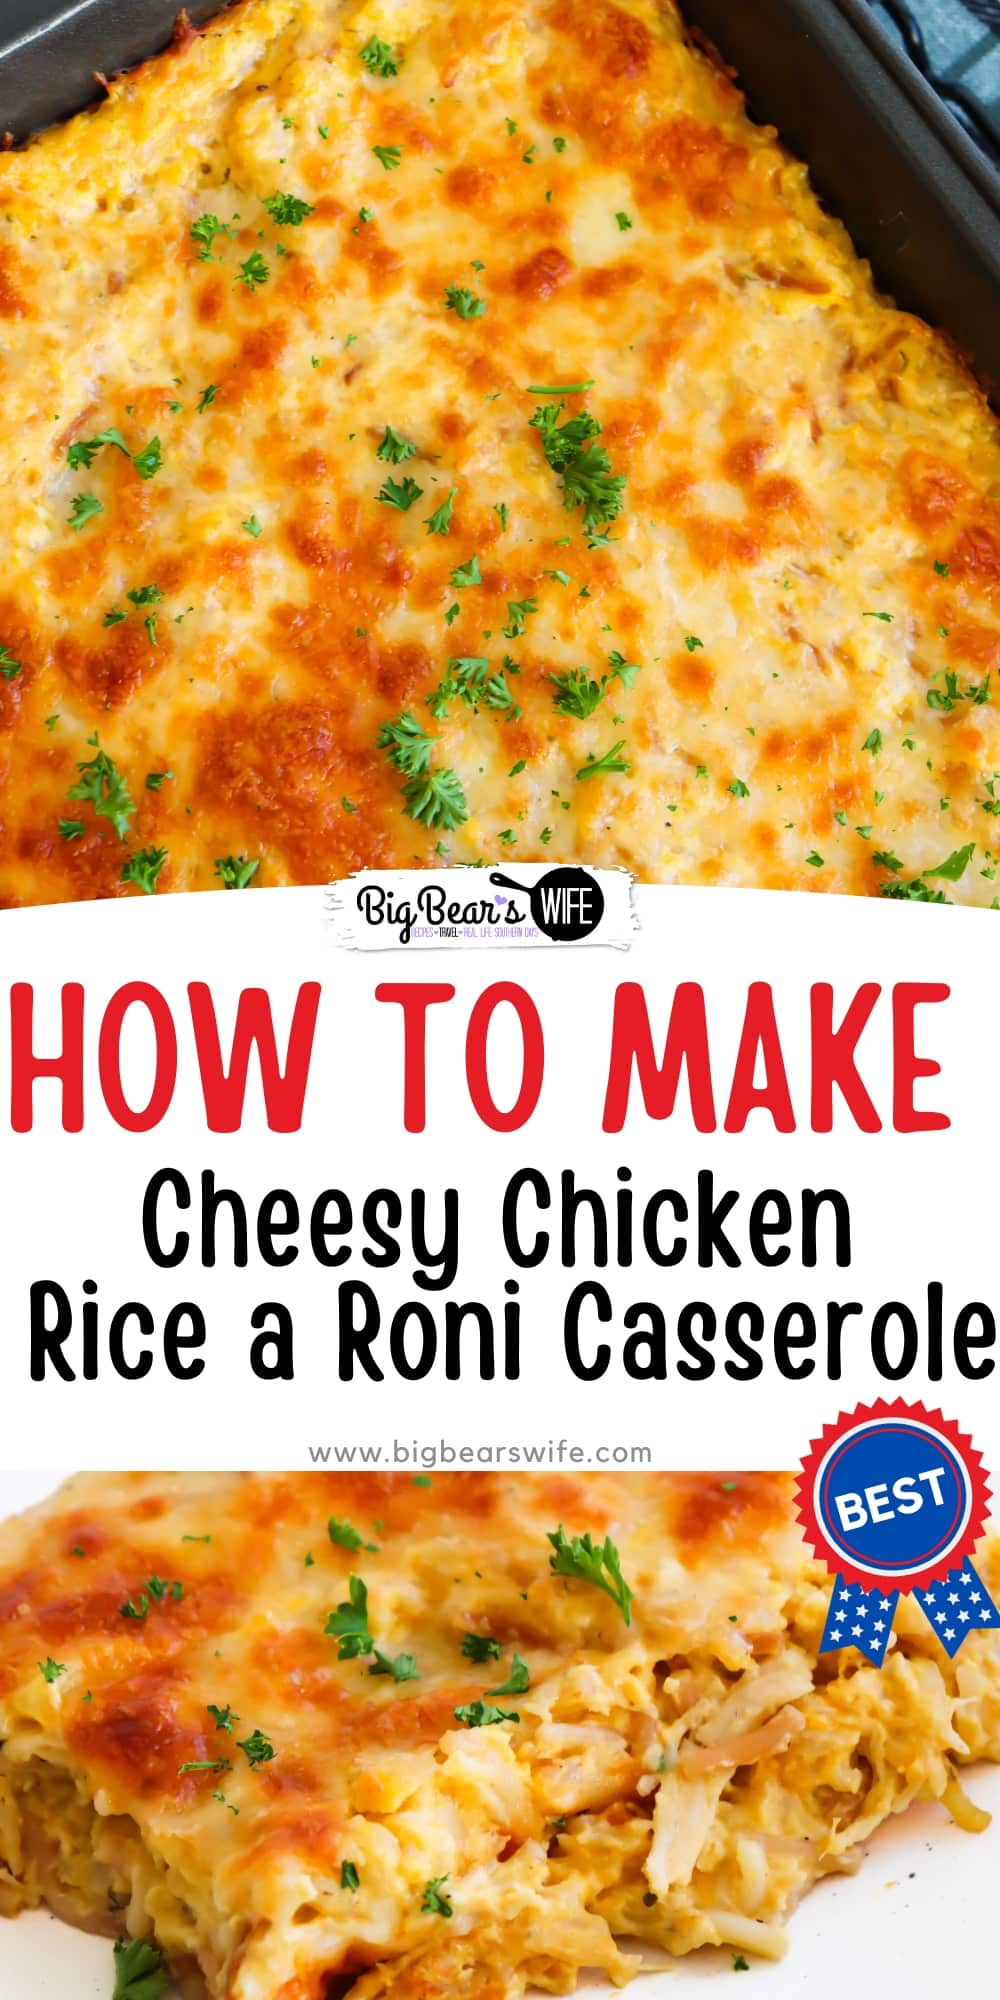 Indulge in the ultimate comfort food with this Cheesy Chicken Rice a Roni Casserole! This recipe is so easy to make and has gotten rave reviews! Prepare to cozy up with a plate of pure comfort and satisfaction! via @bigbearswife